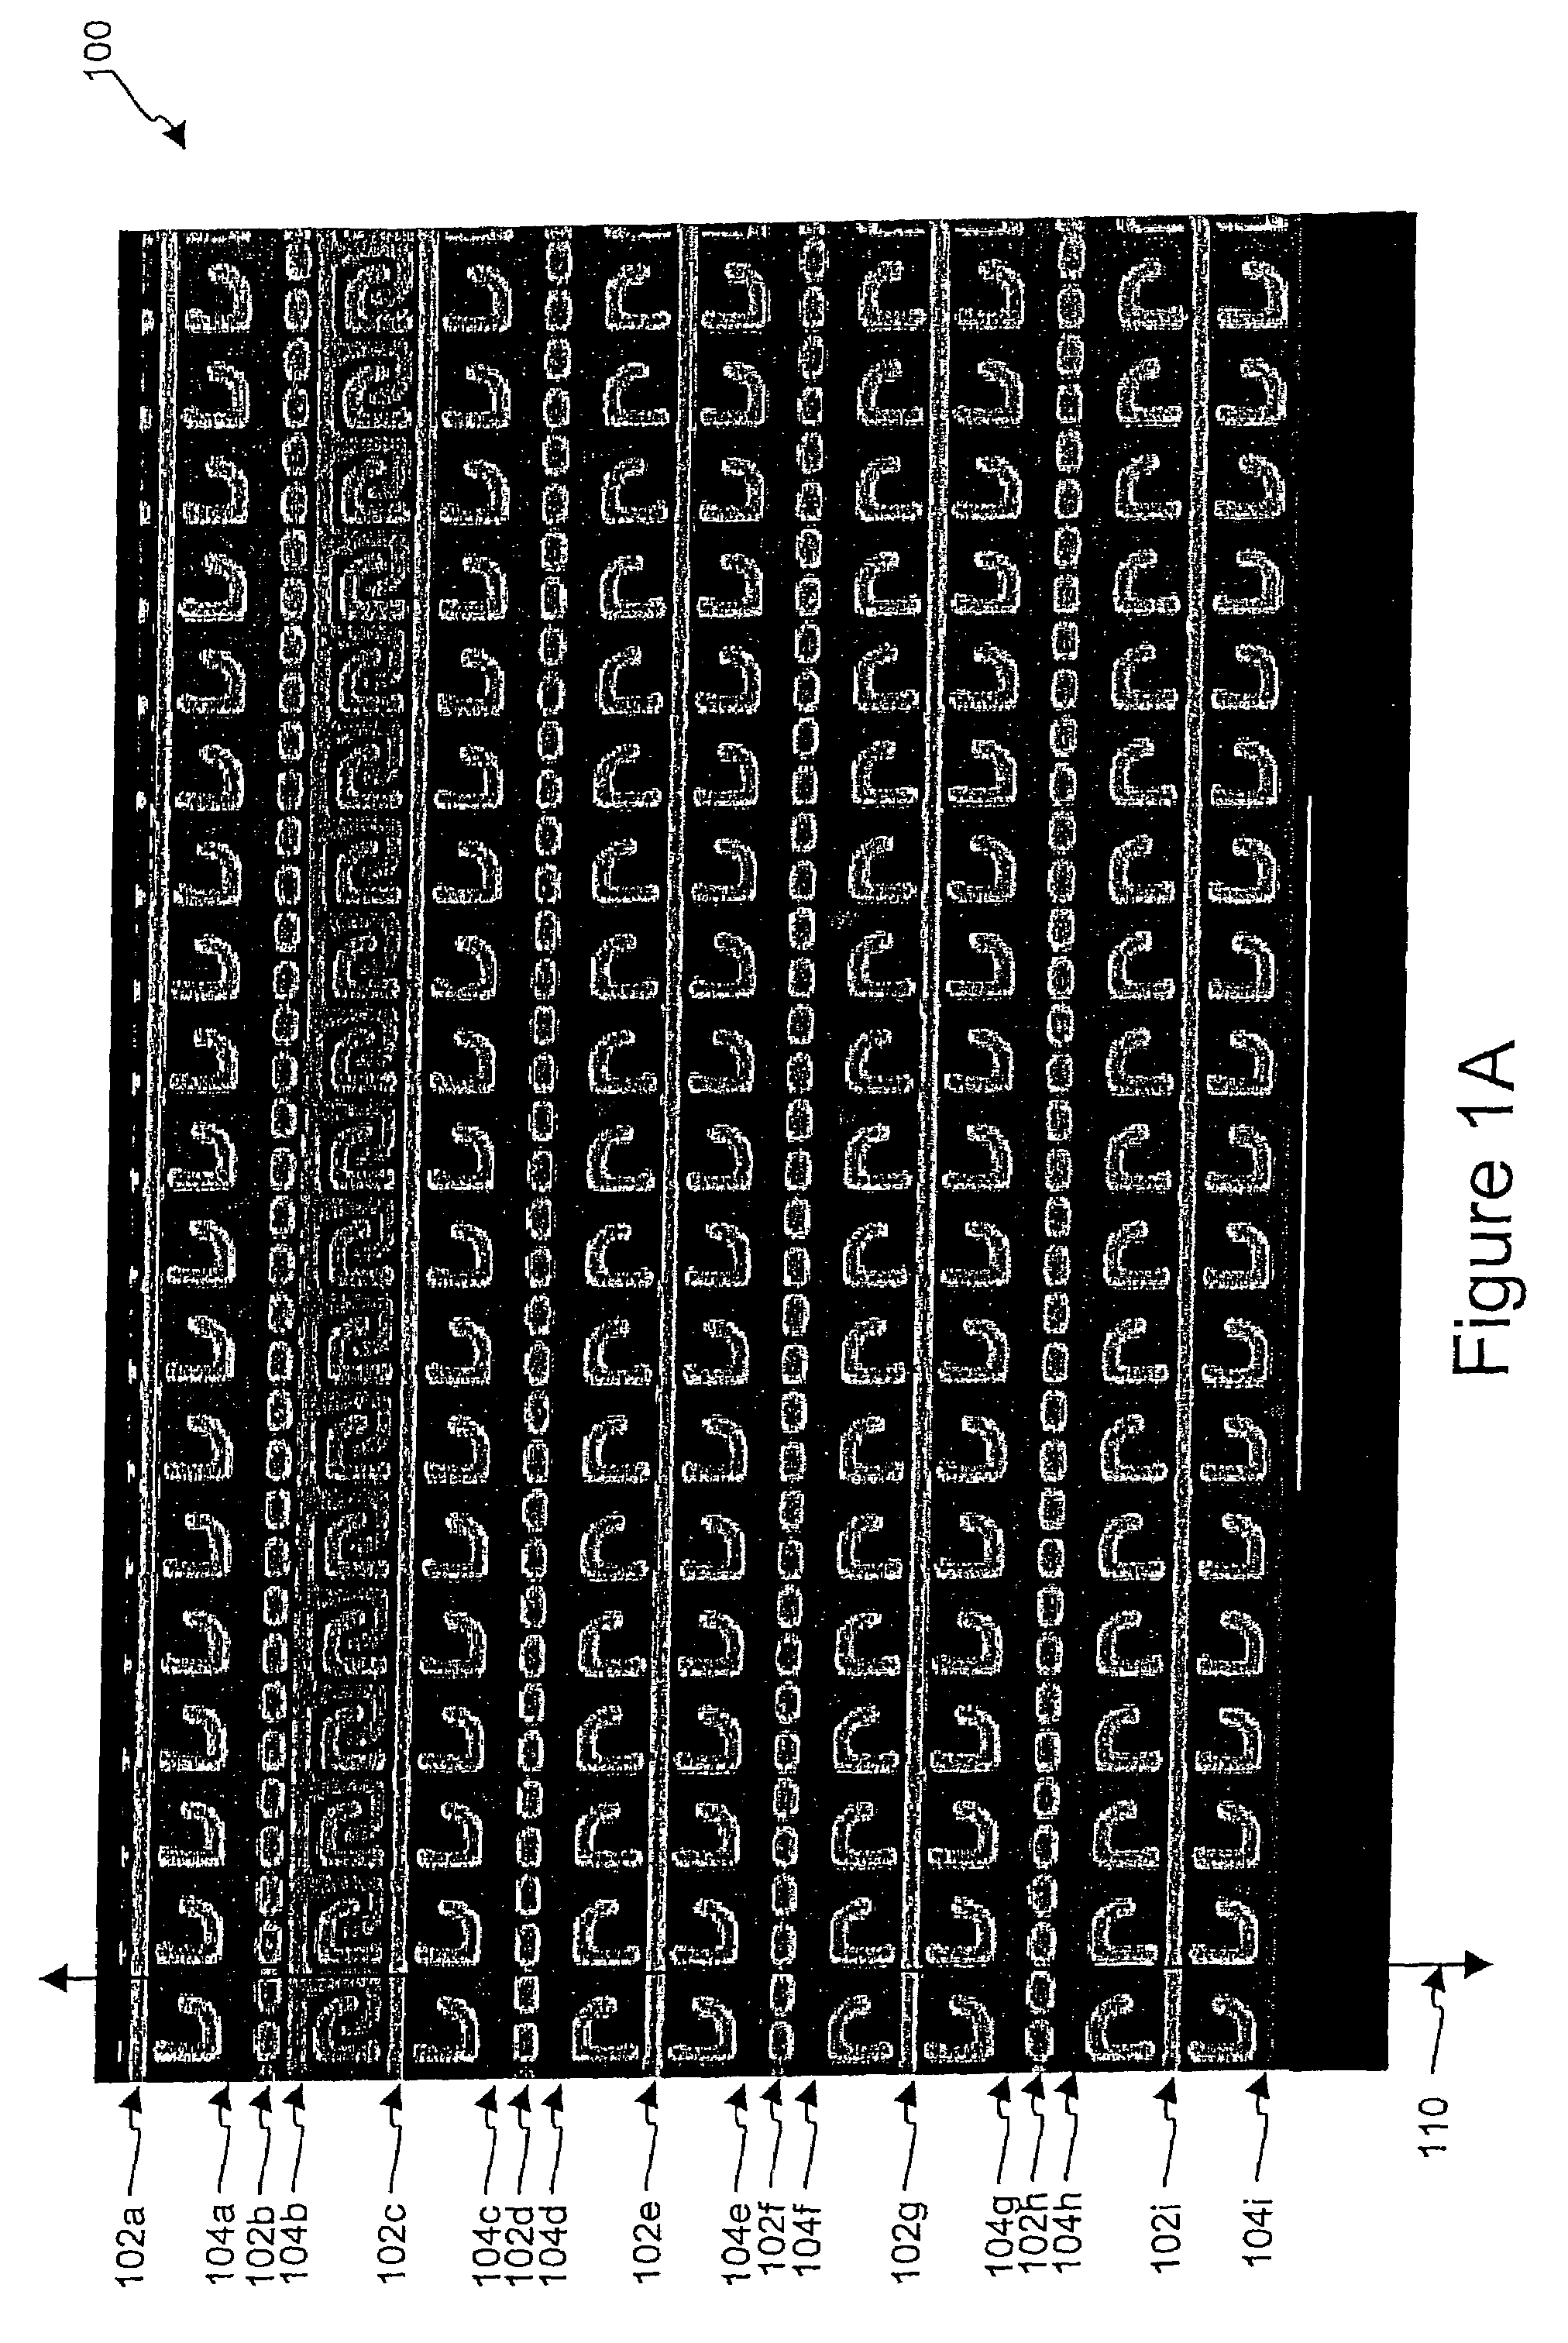 Apparatus and methods for detection of systematic defects